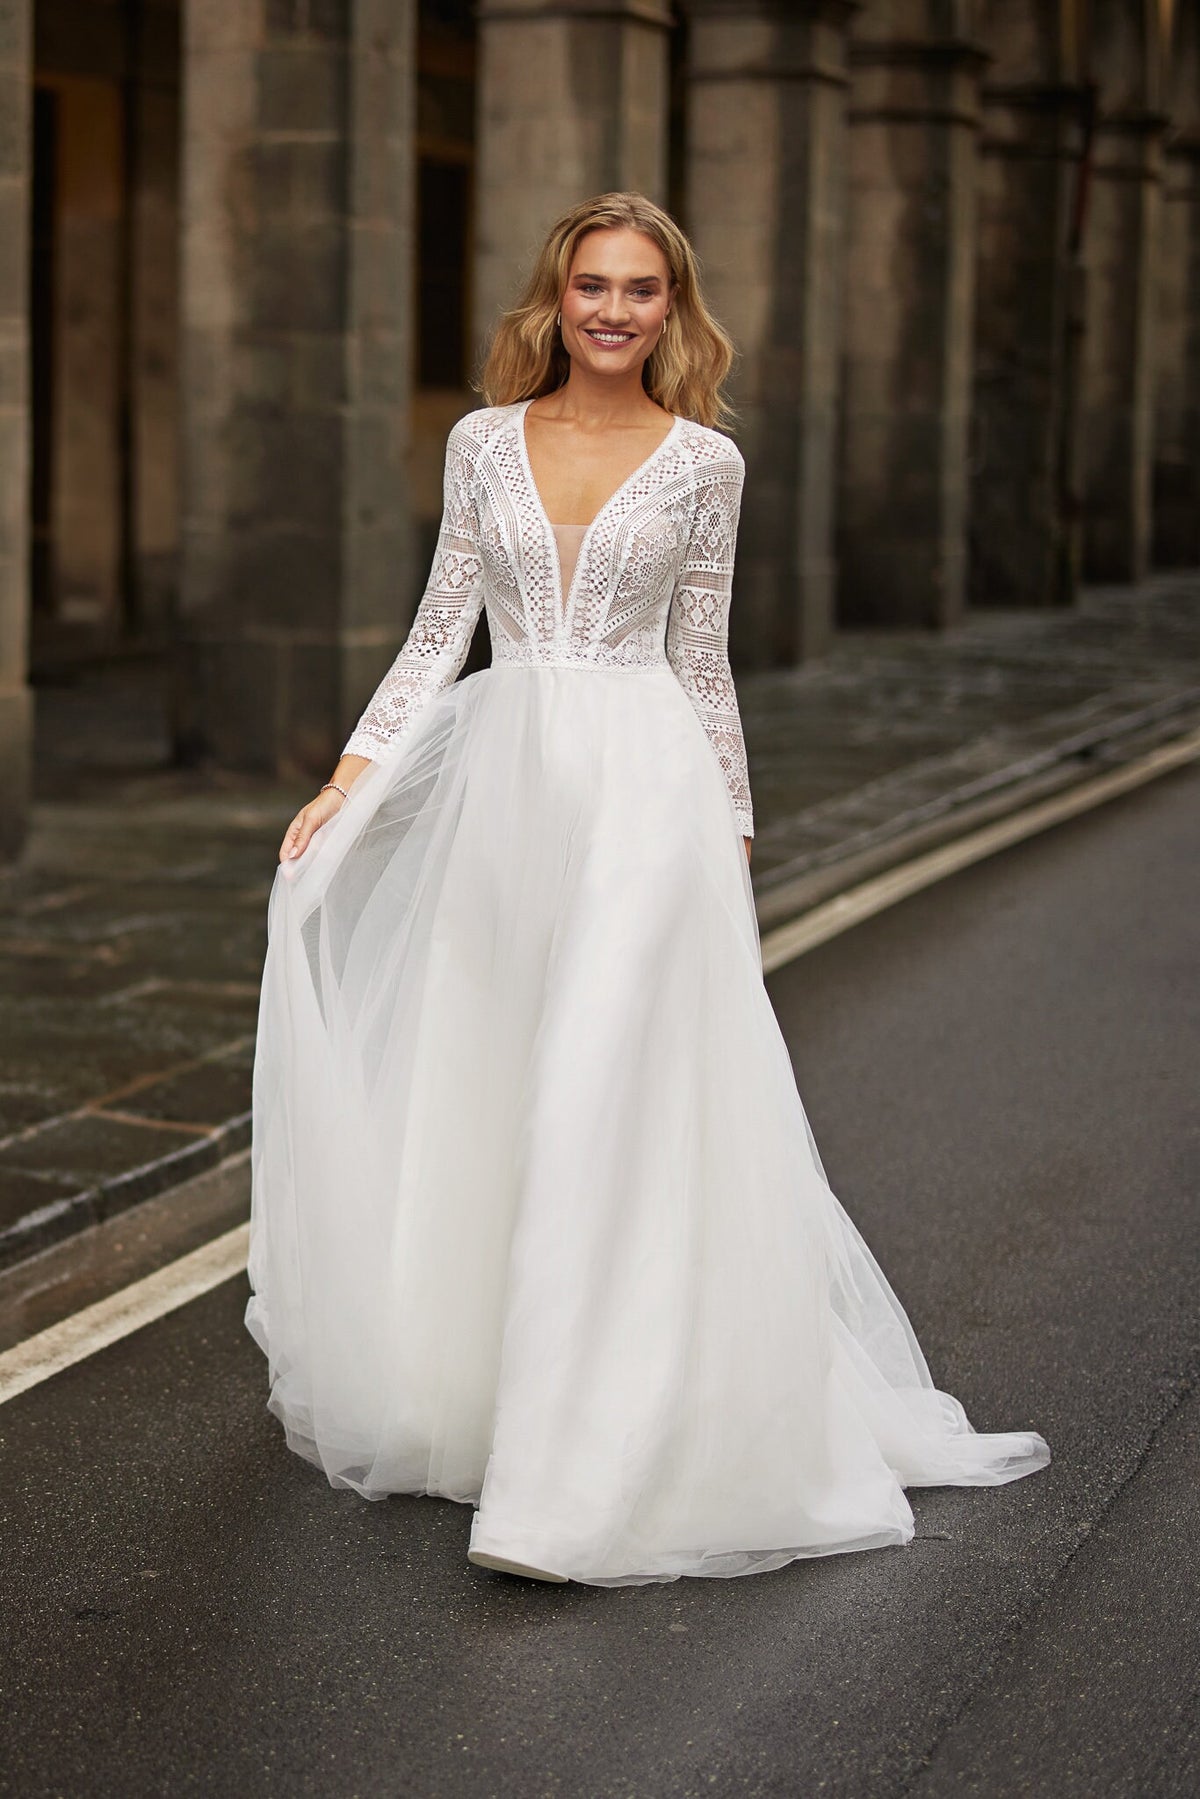 Elegant Long Sleeve A-Line Wedding Dress with Deep V-Neck Lace Bodice and Tulle Skirt Bridal Gown Geometric Lace